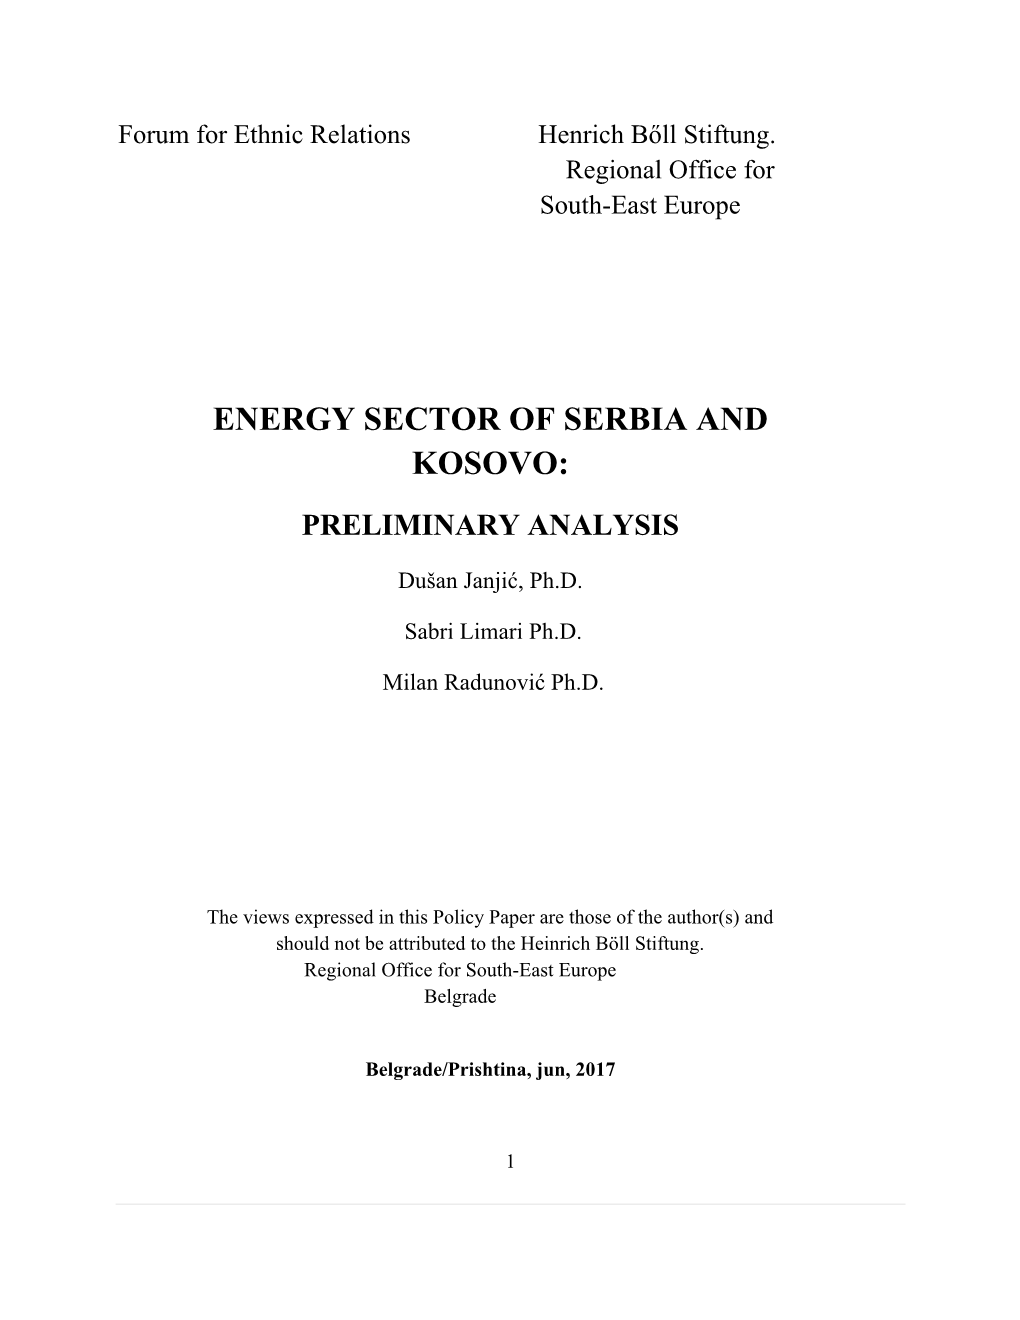 Energy Sector of Serbia and Kosovo